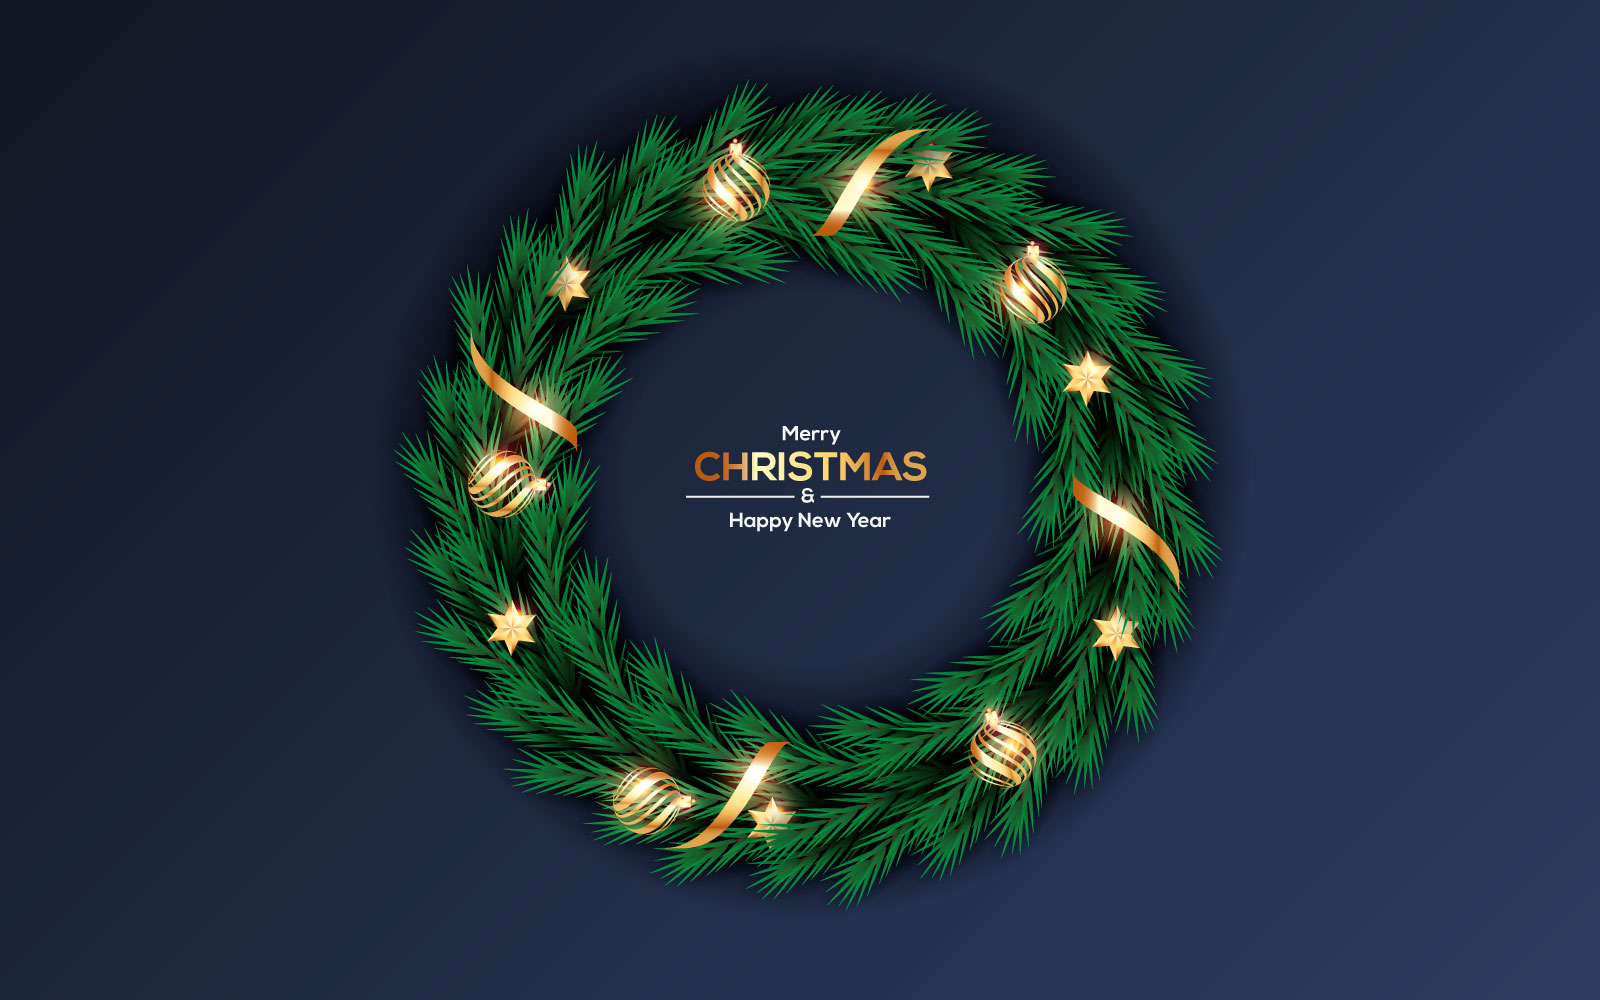 Best christmas wishes wreath with decorated holiday wreath flat vector illustration concept